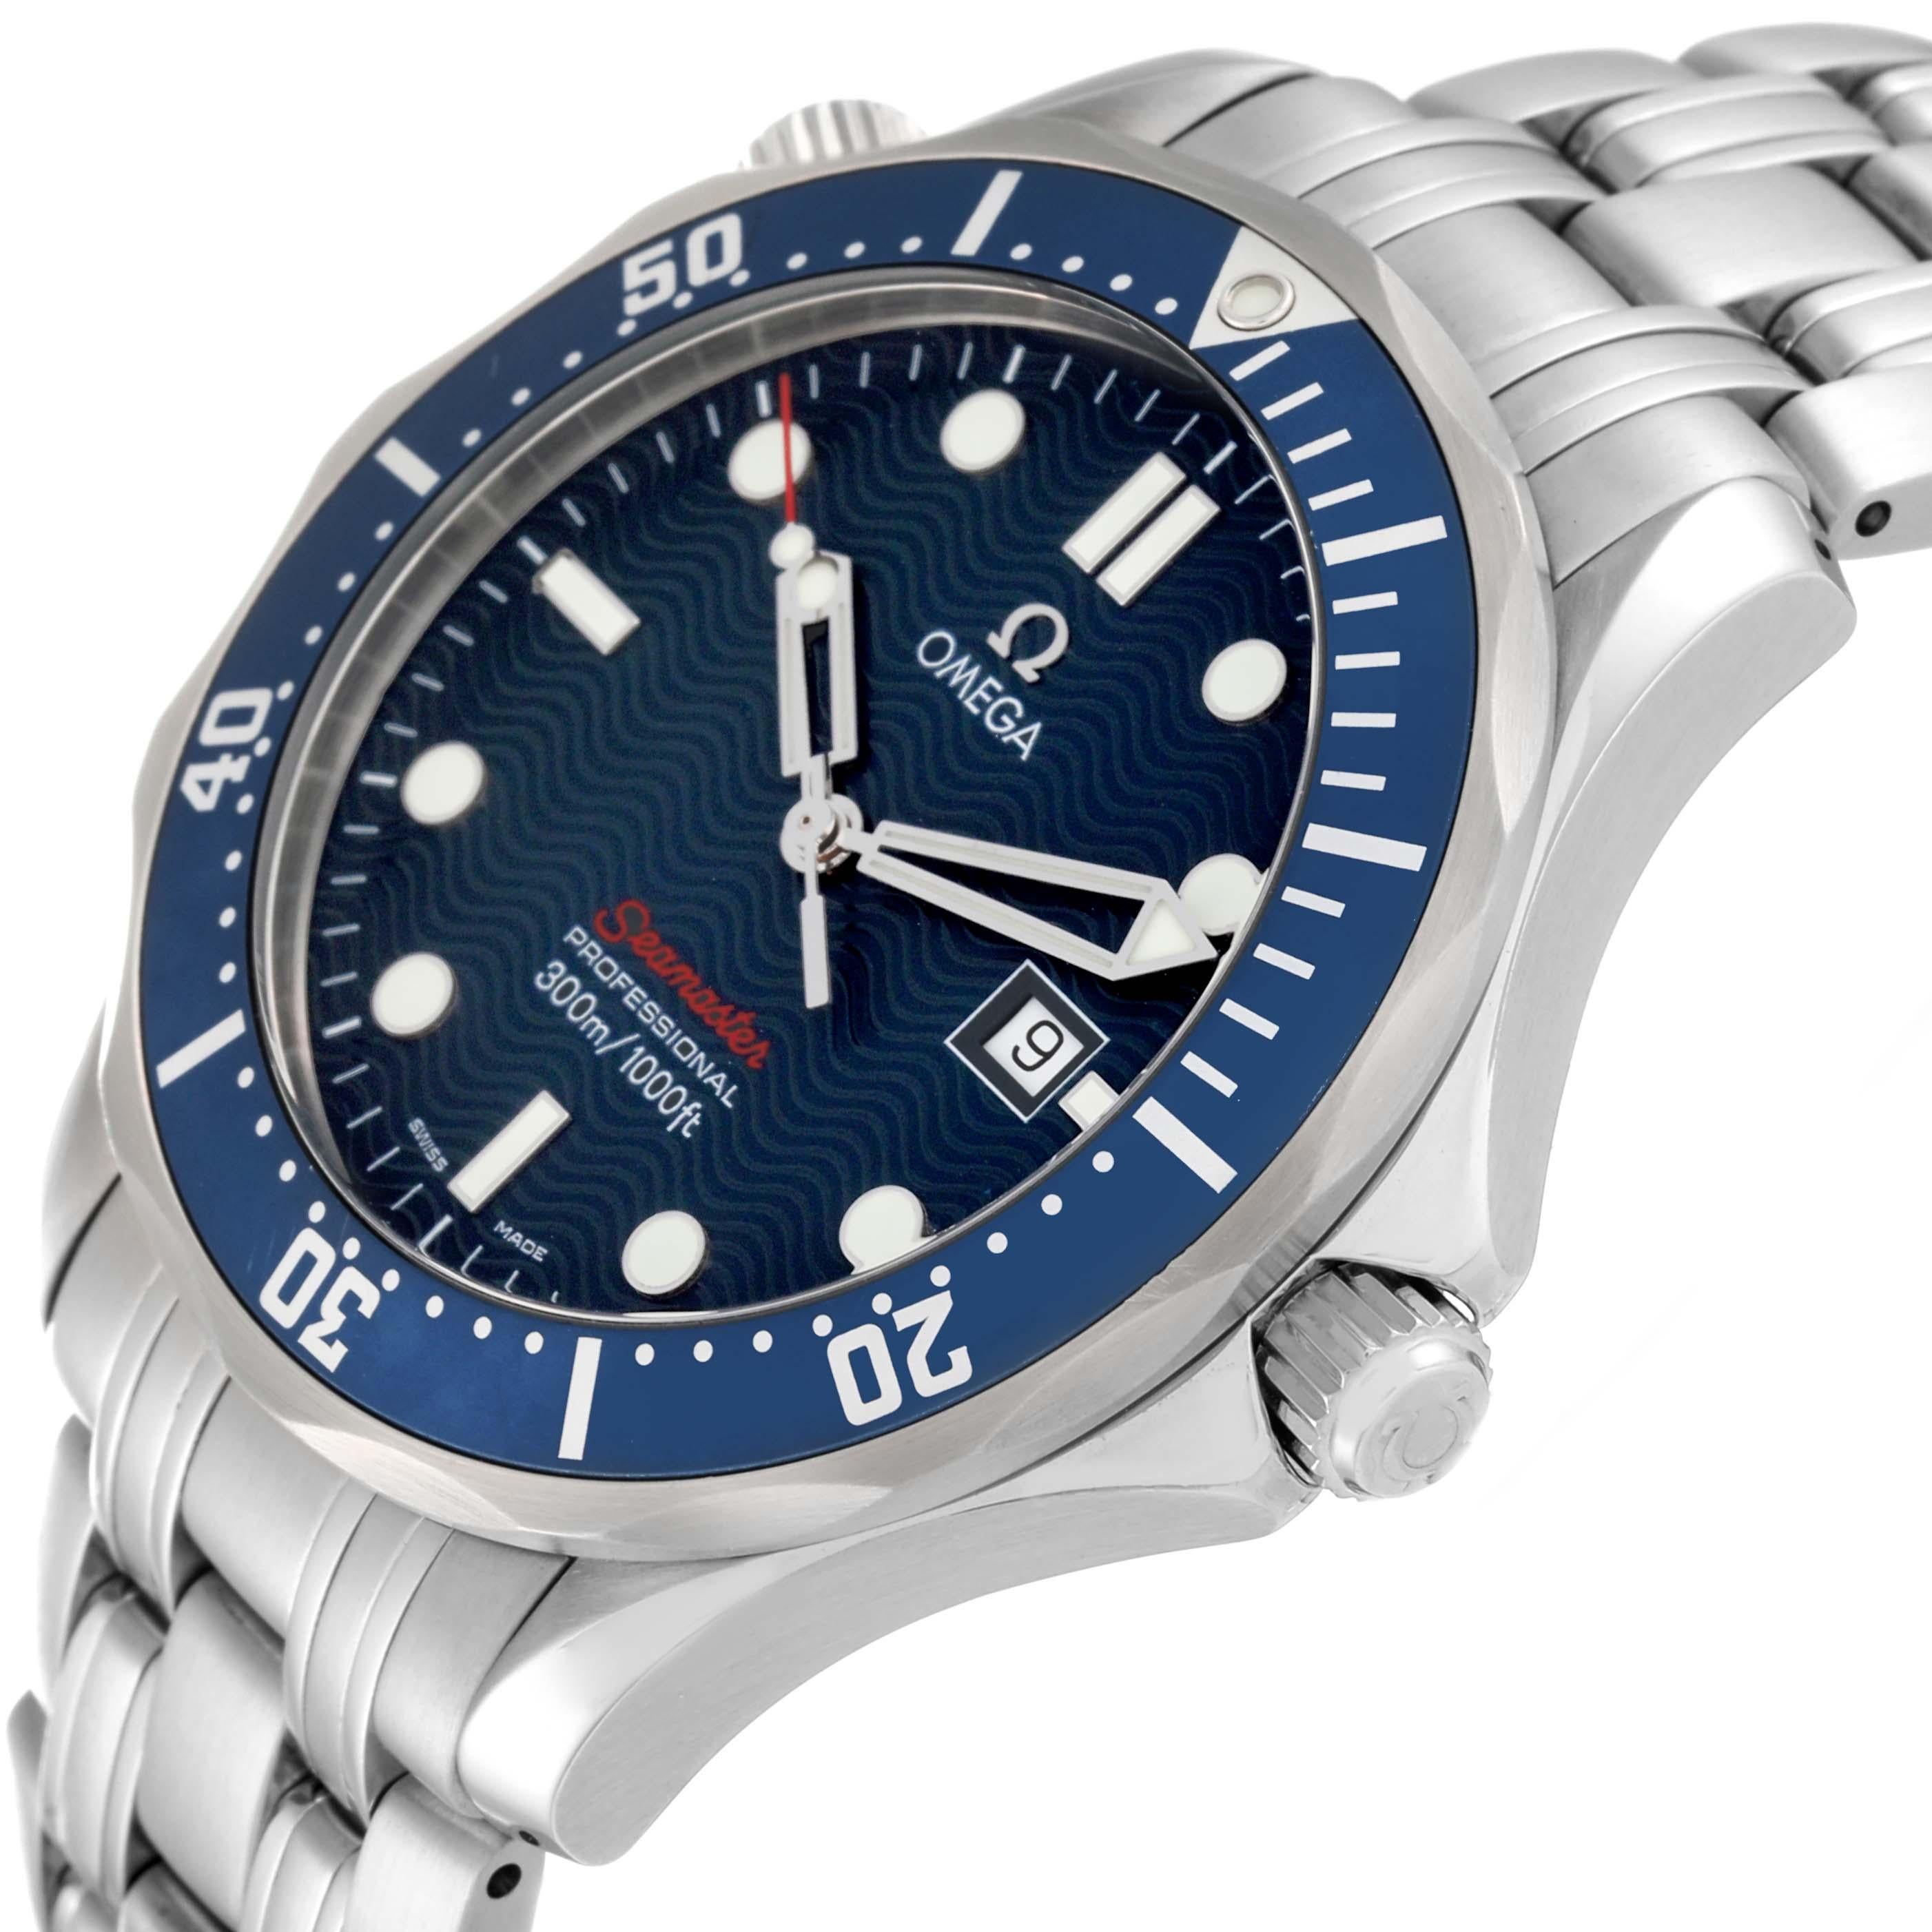 Omega Seamaster Bond 300M Blue Dial Steel Mens Watch 2221.80.00 Card. Quartz movement. Stainless steel case 41.0 mm in diameter. Omega logo on the crown. Blue unidirectional rotating bezel. Scratch resistant sapphire crystal. Blue wave decor dial